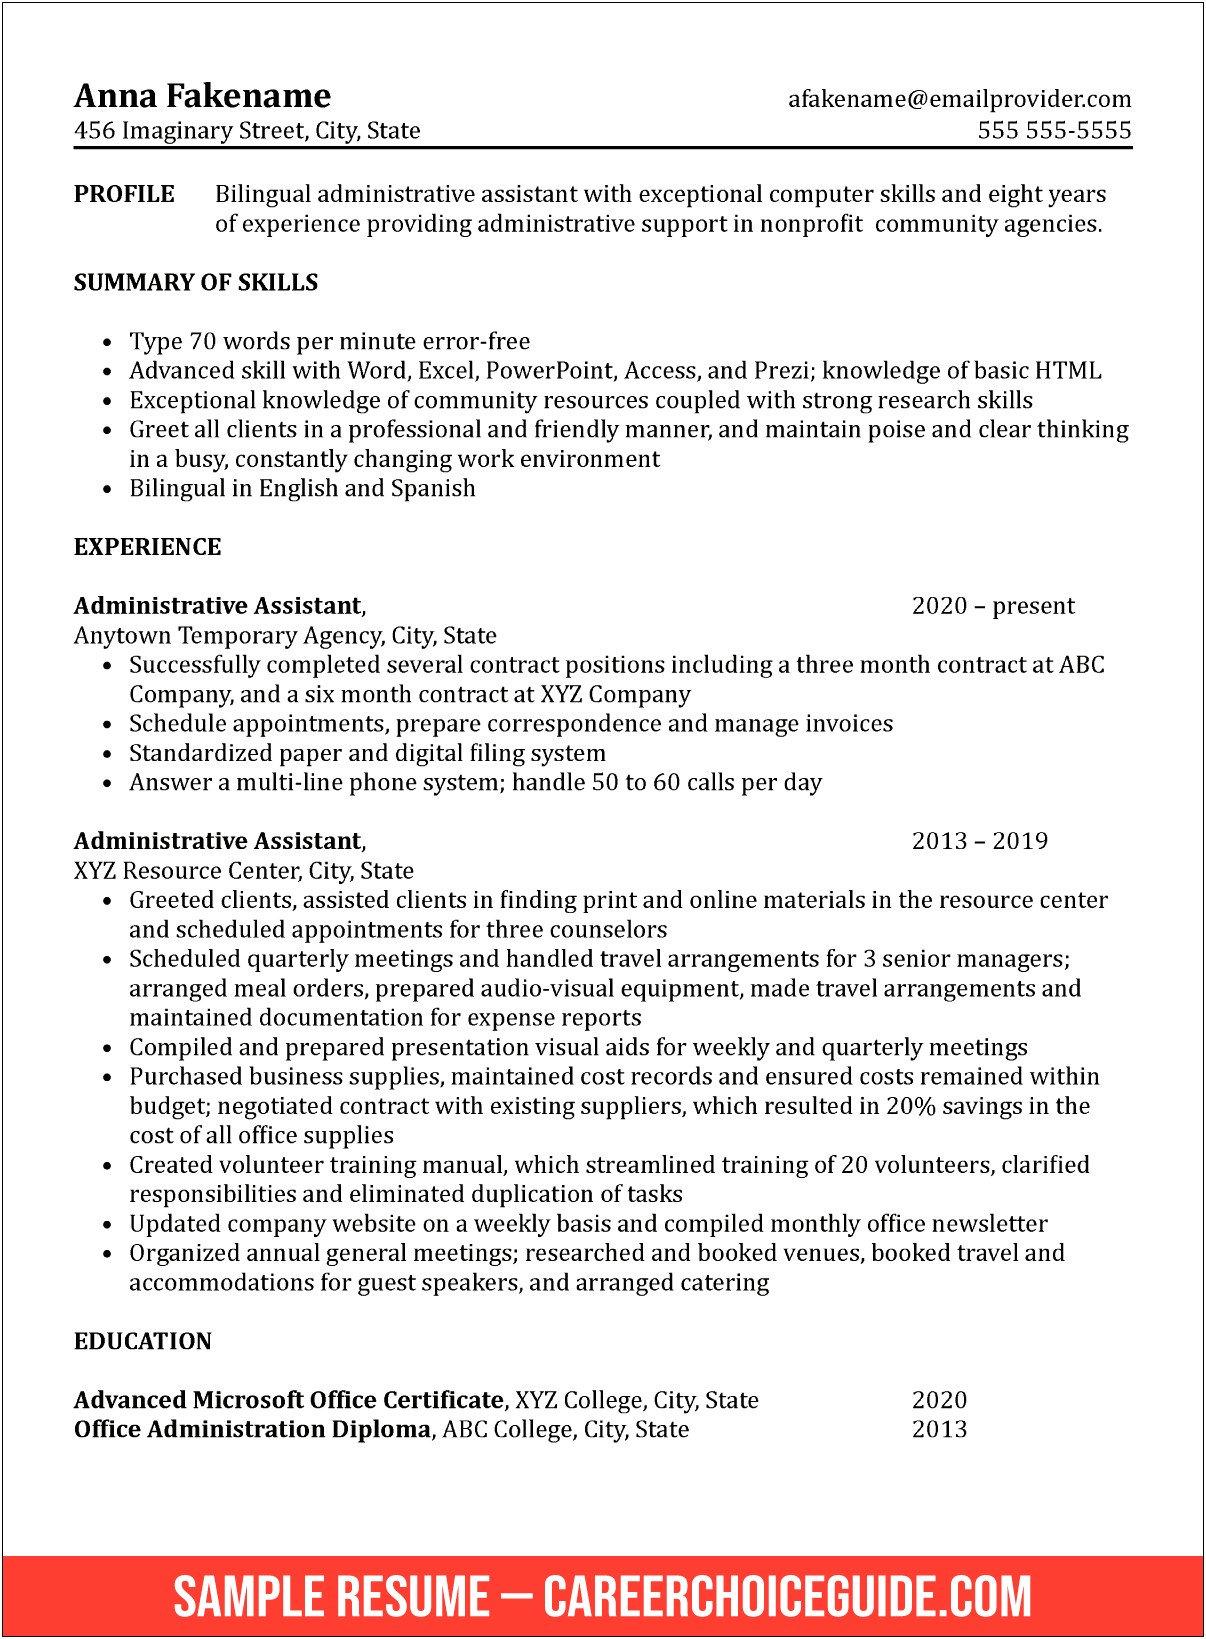 Executive Assistant Skill Set For Resume